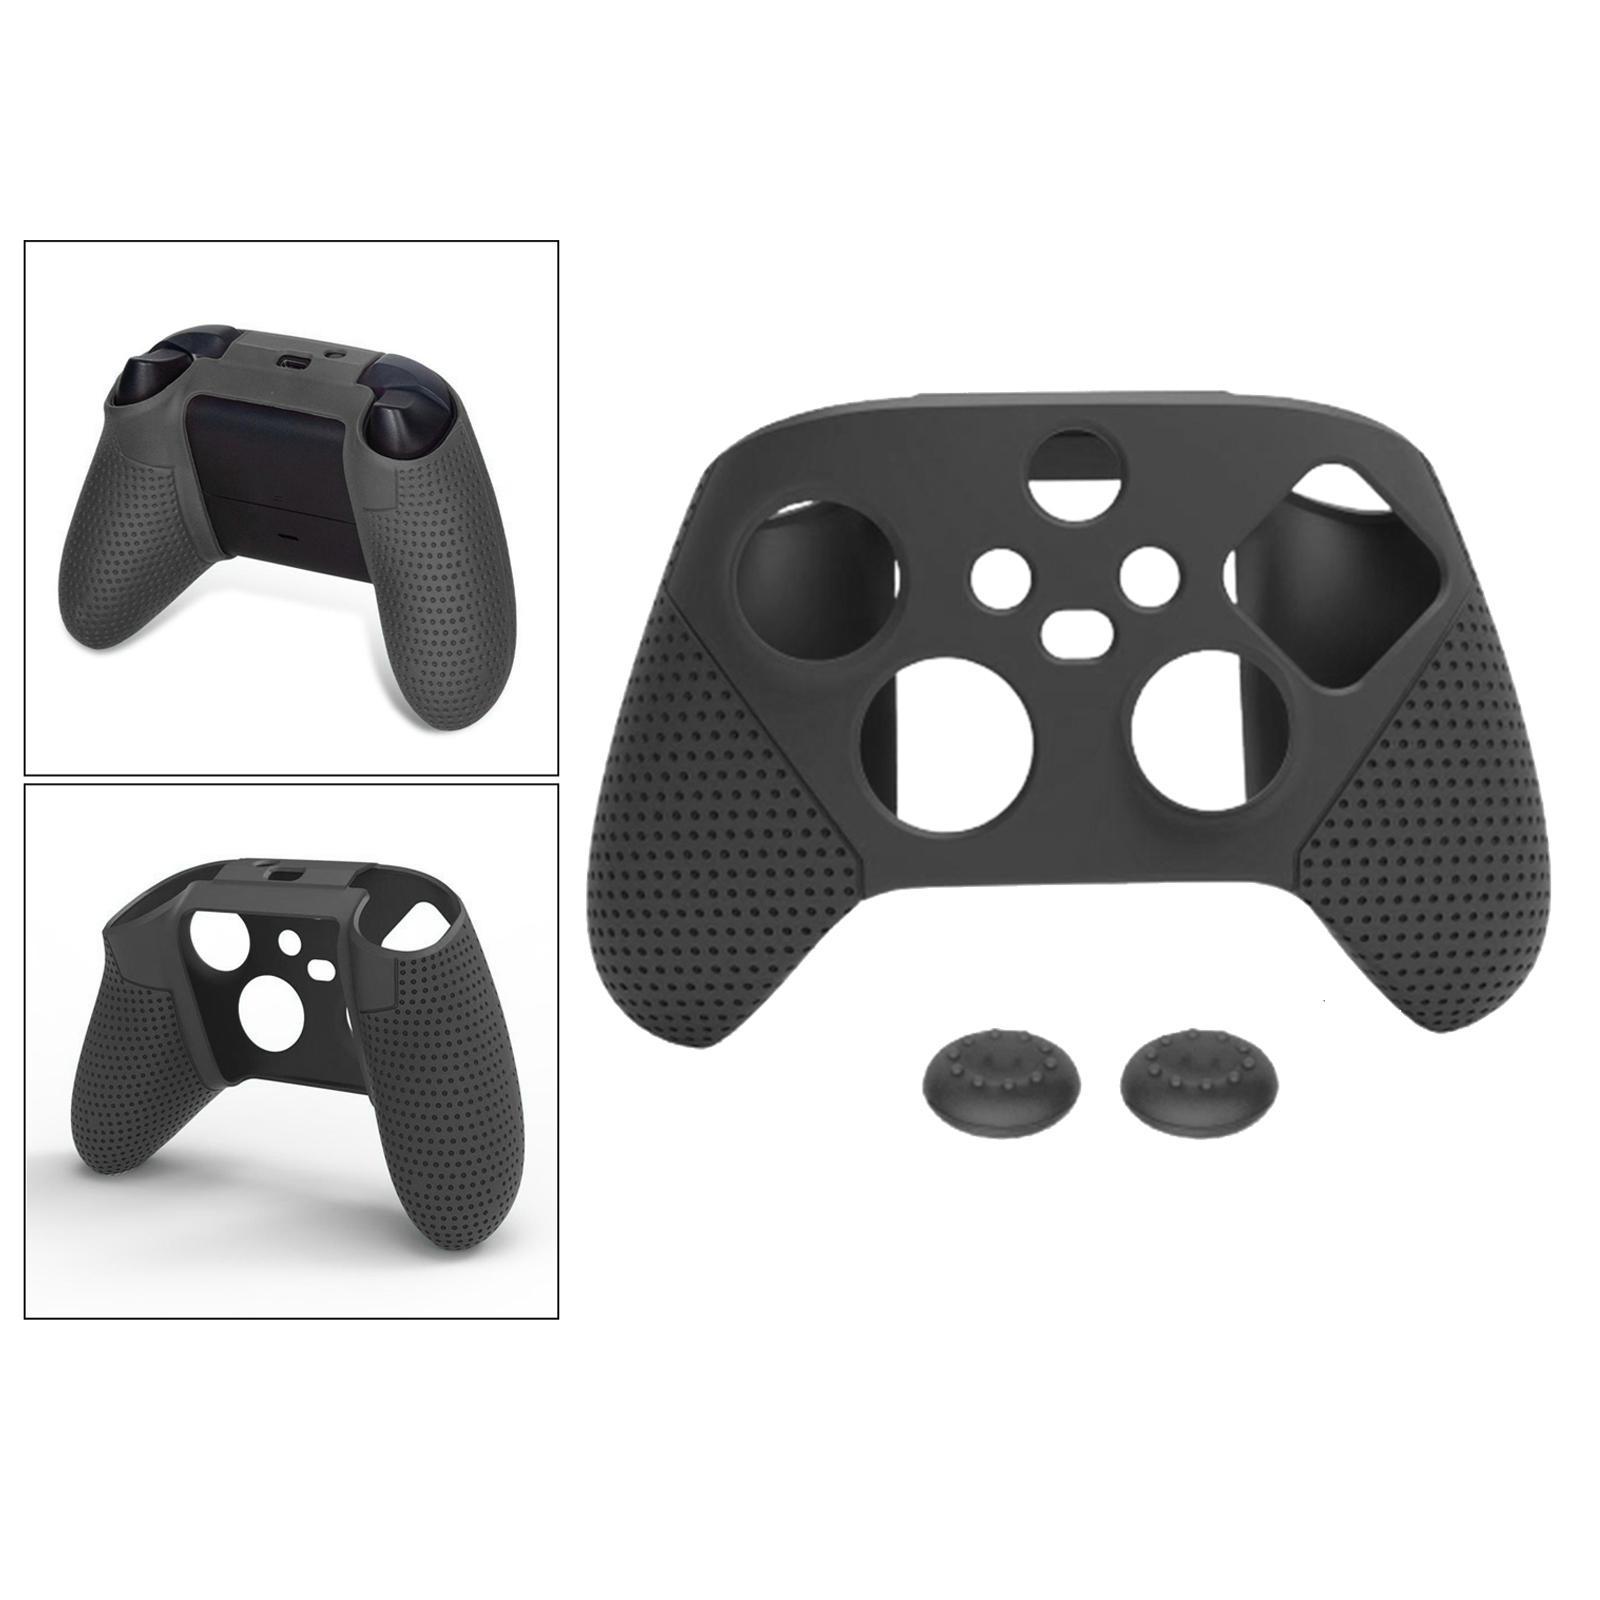 2x Silicone Case Cover Skin Joystick Grip for Xbox Series S X Controller